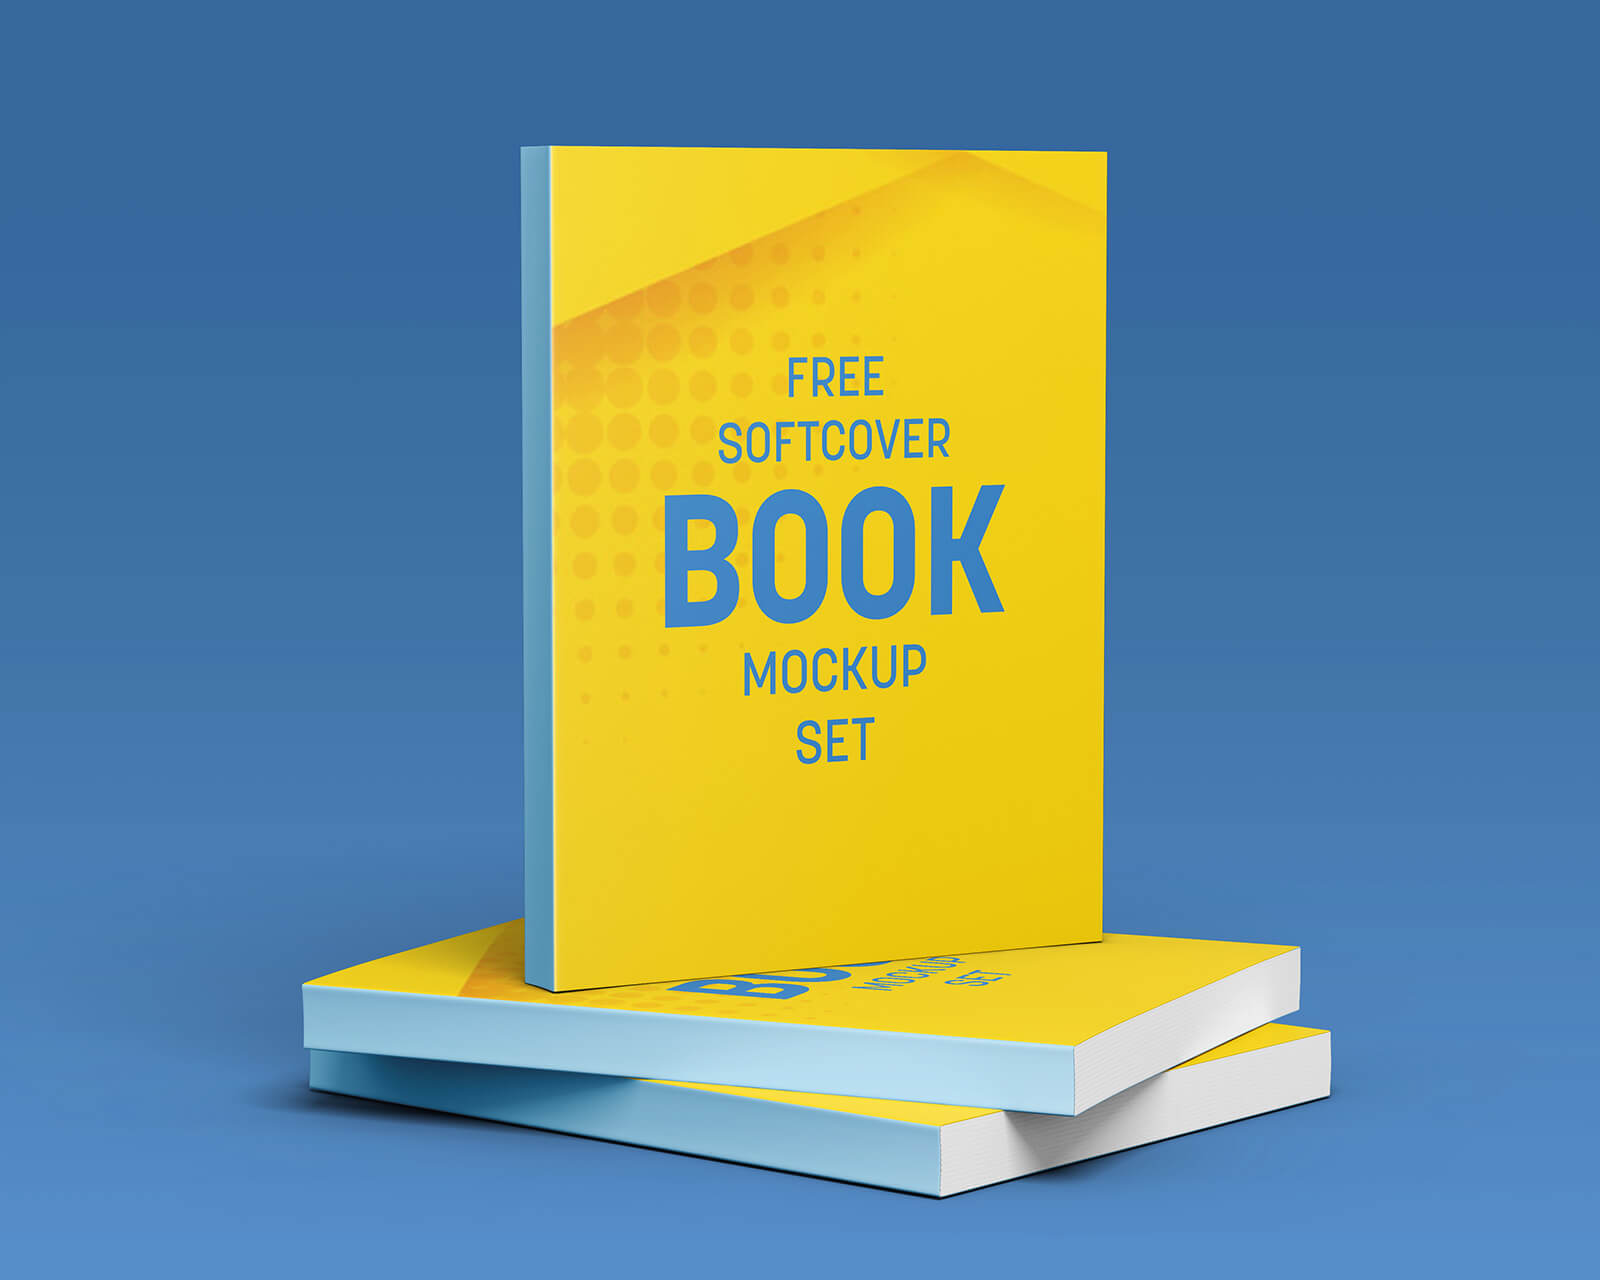 Free Perfect Bound Softcover Book Mockup Psd Set - Good Mockups